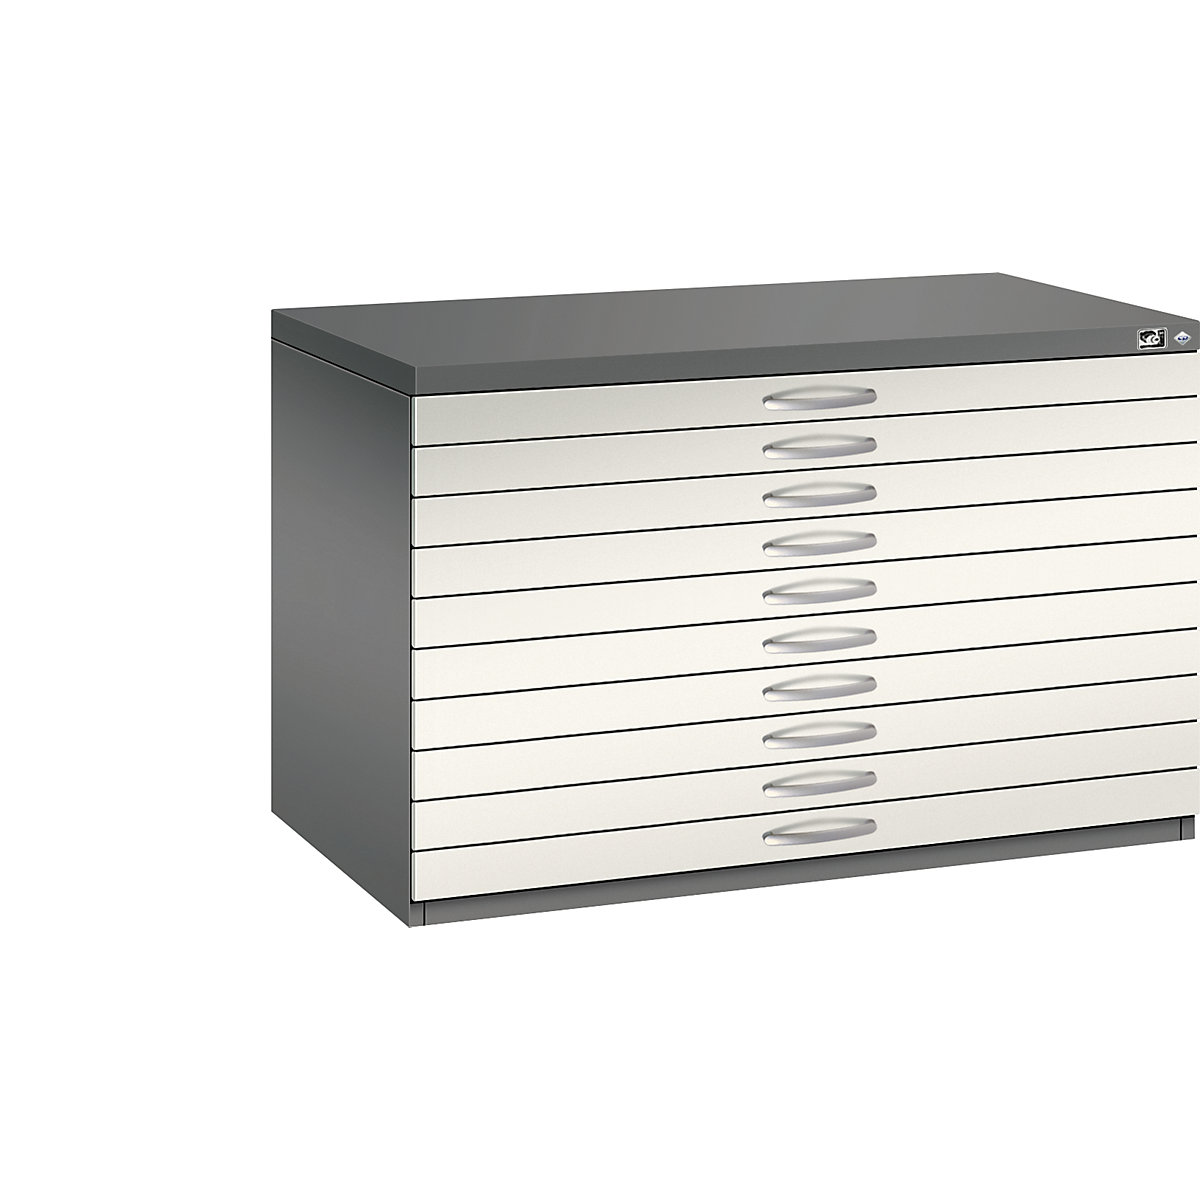 Drawing cabinet – C+P, A1, 10 drawers, height 760 mm, volcanic grey / oyster white-18